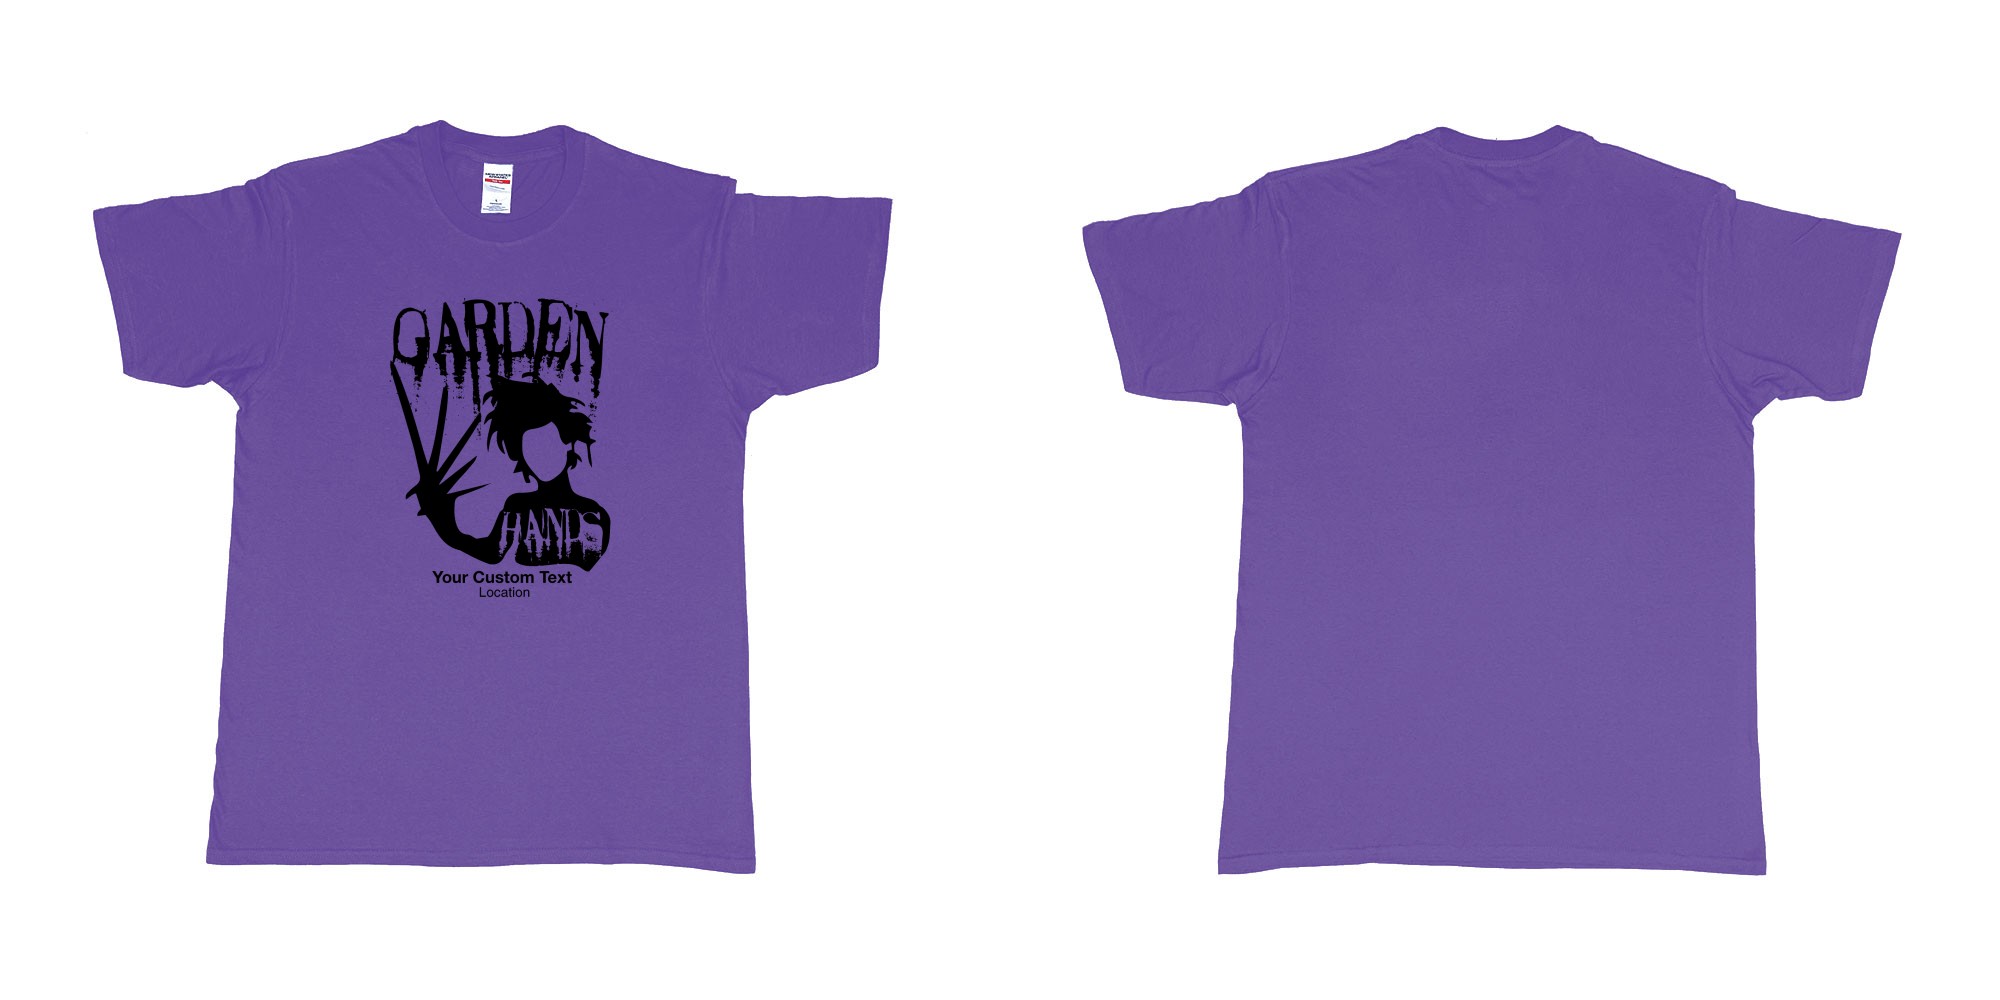 Custom tshirt design garden hands edward scissorhands custom design in fabric color purple choice your own text made in Bali by The Pirate Way